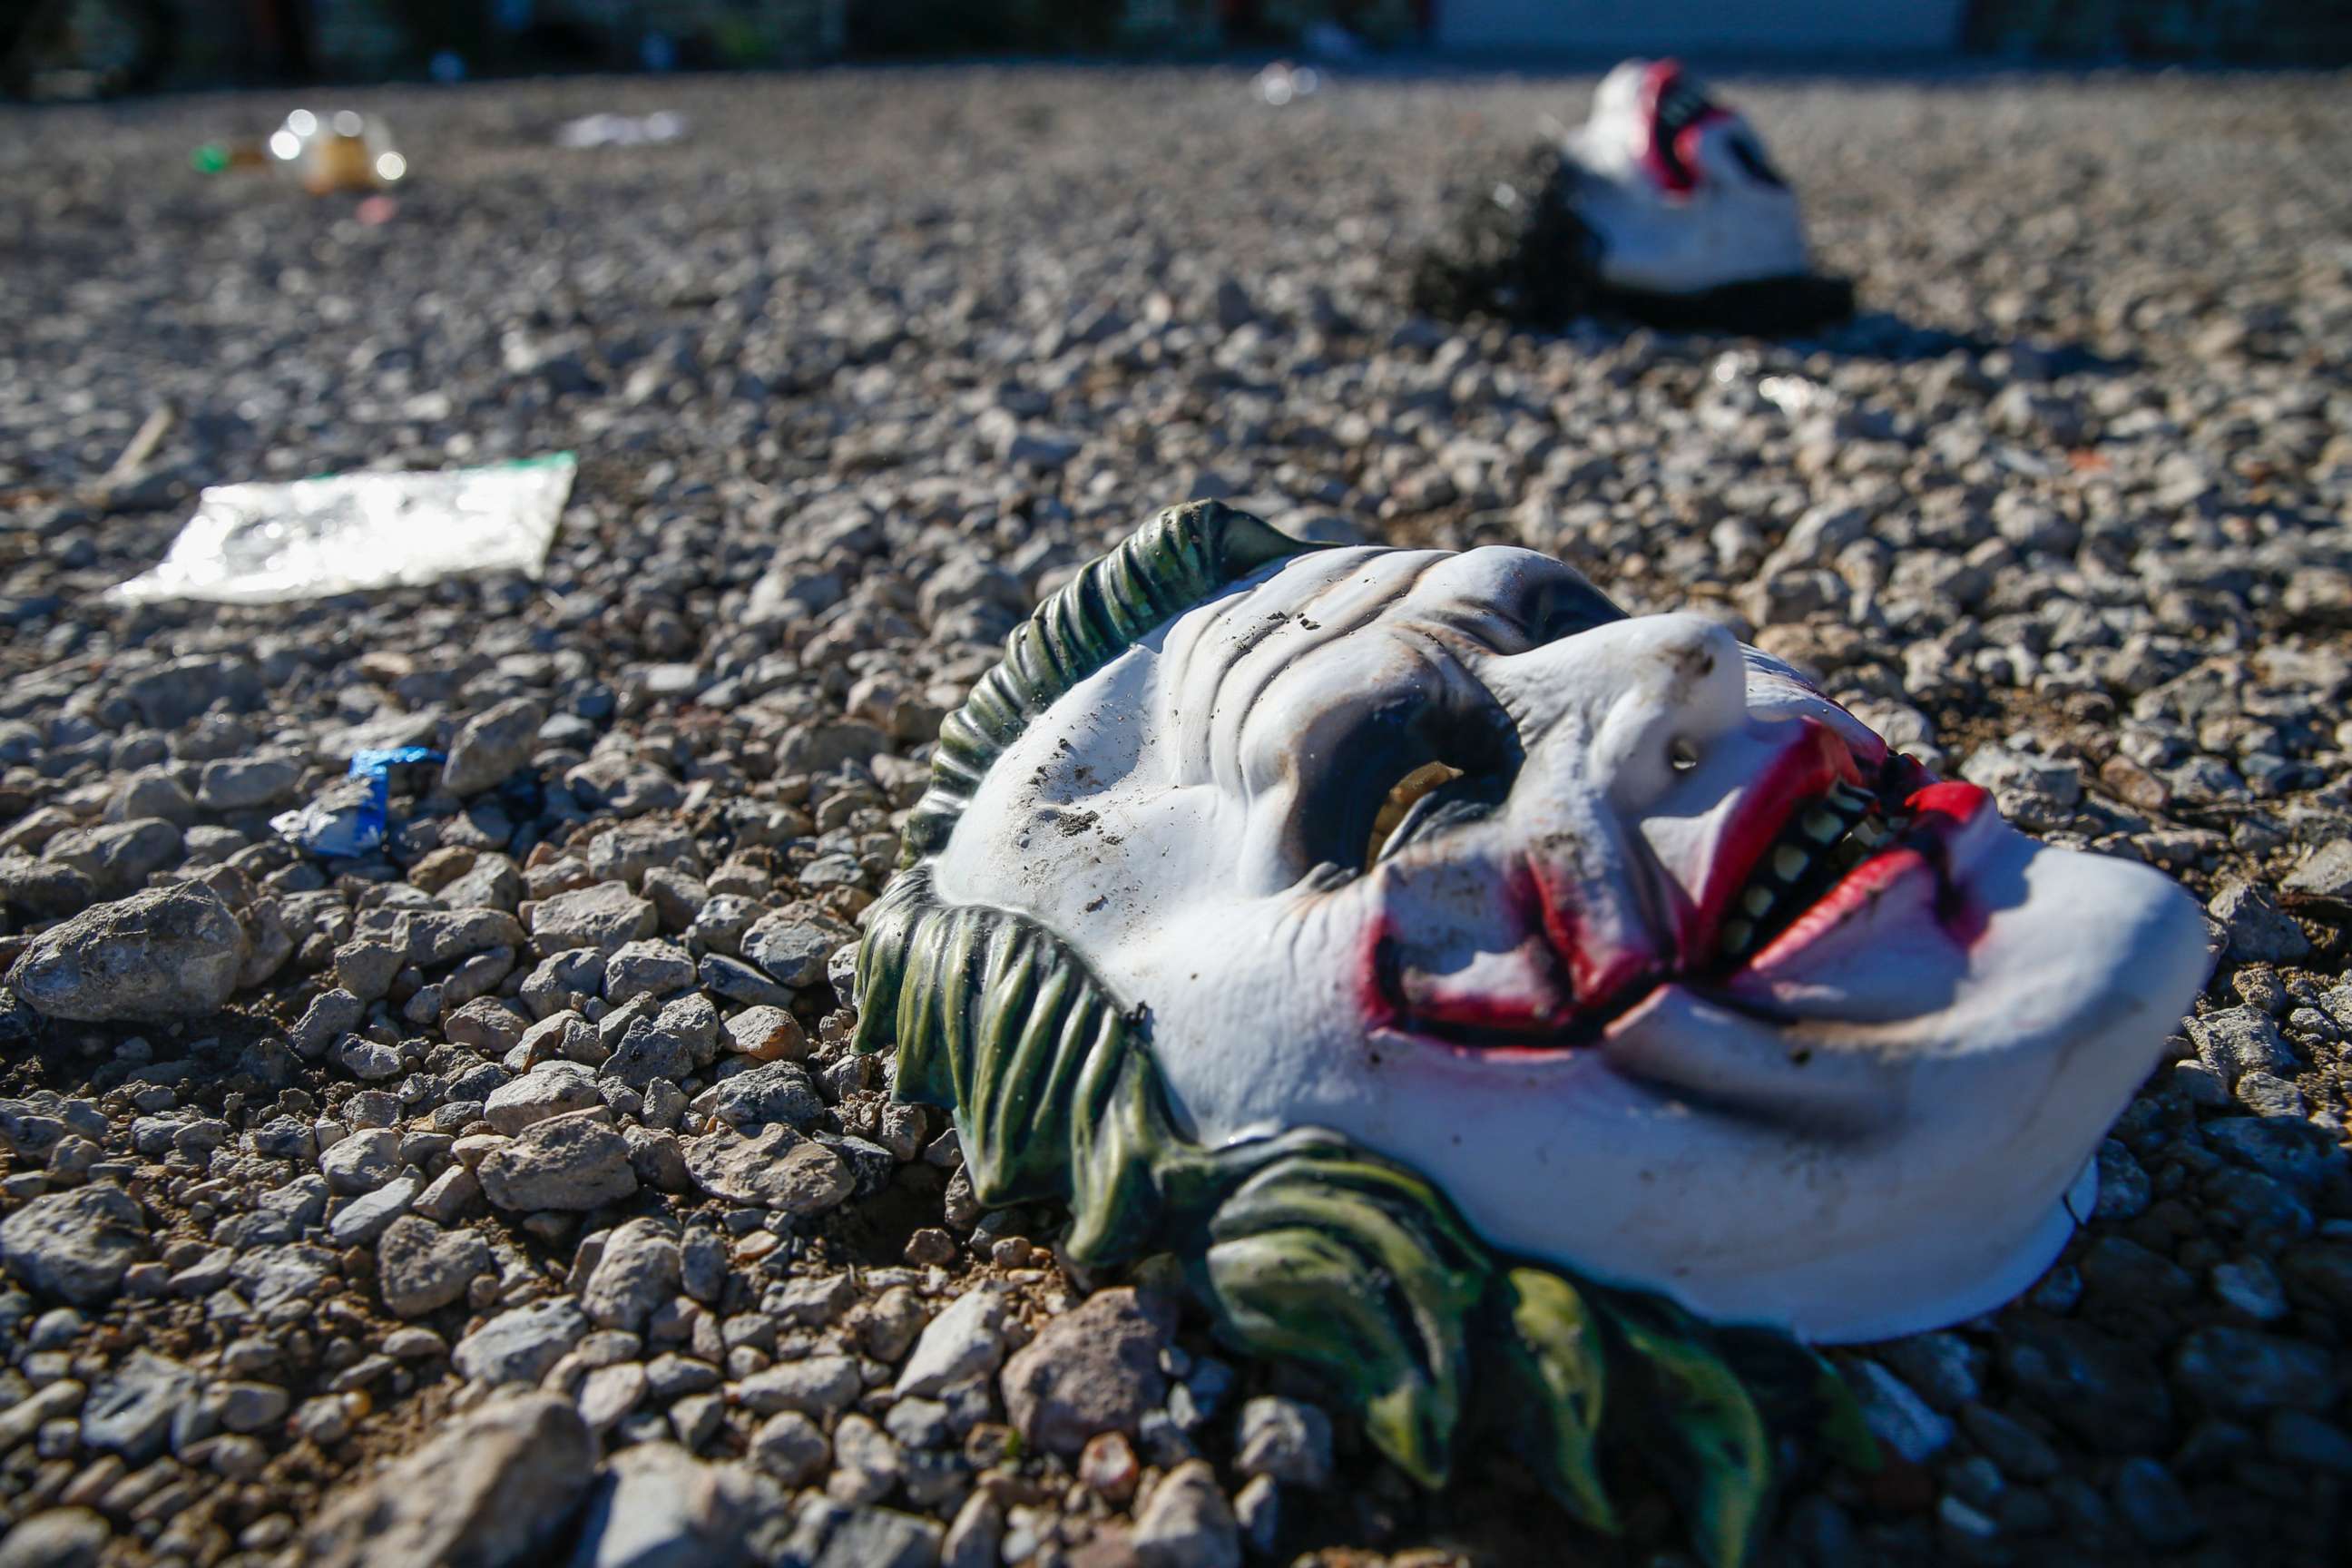 PHOTO: Halloween masks litter the ground amongst signs of chaos at the scene of a deadly shooting in Greenville, Texas, on Oct. 27, 2019.